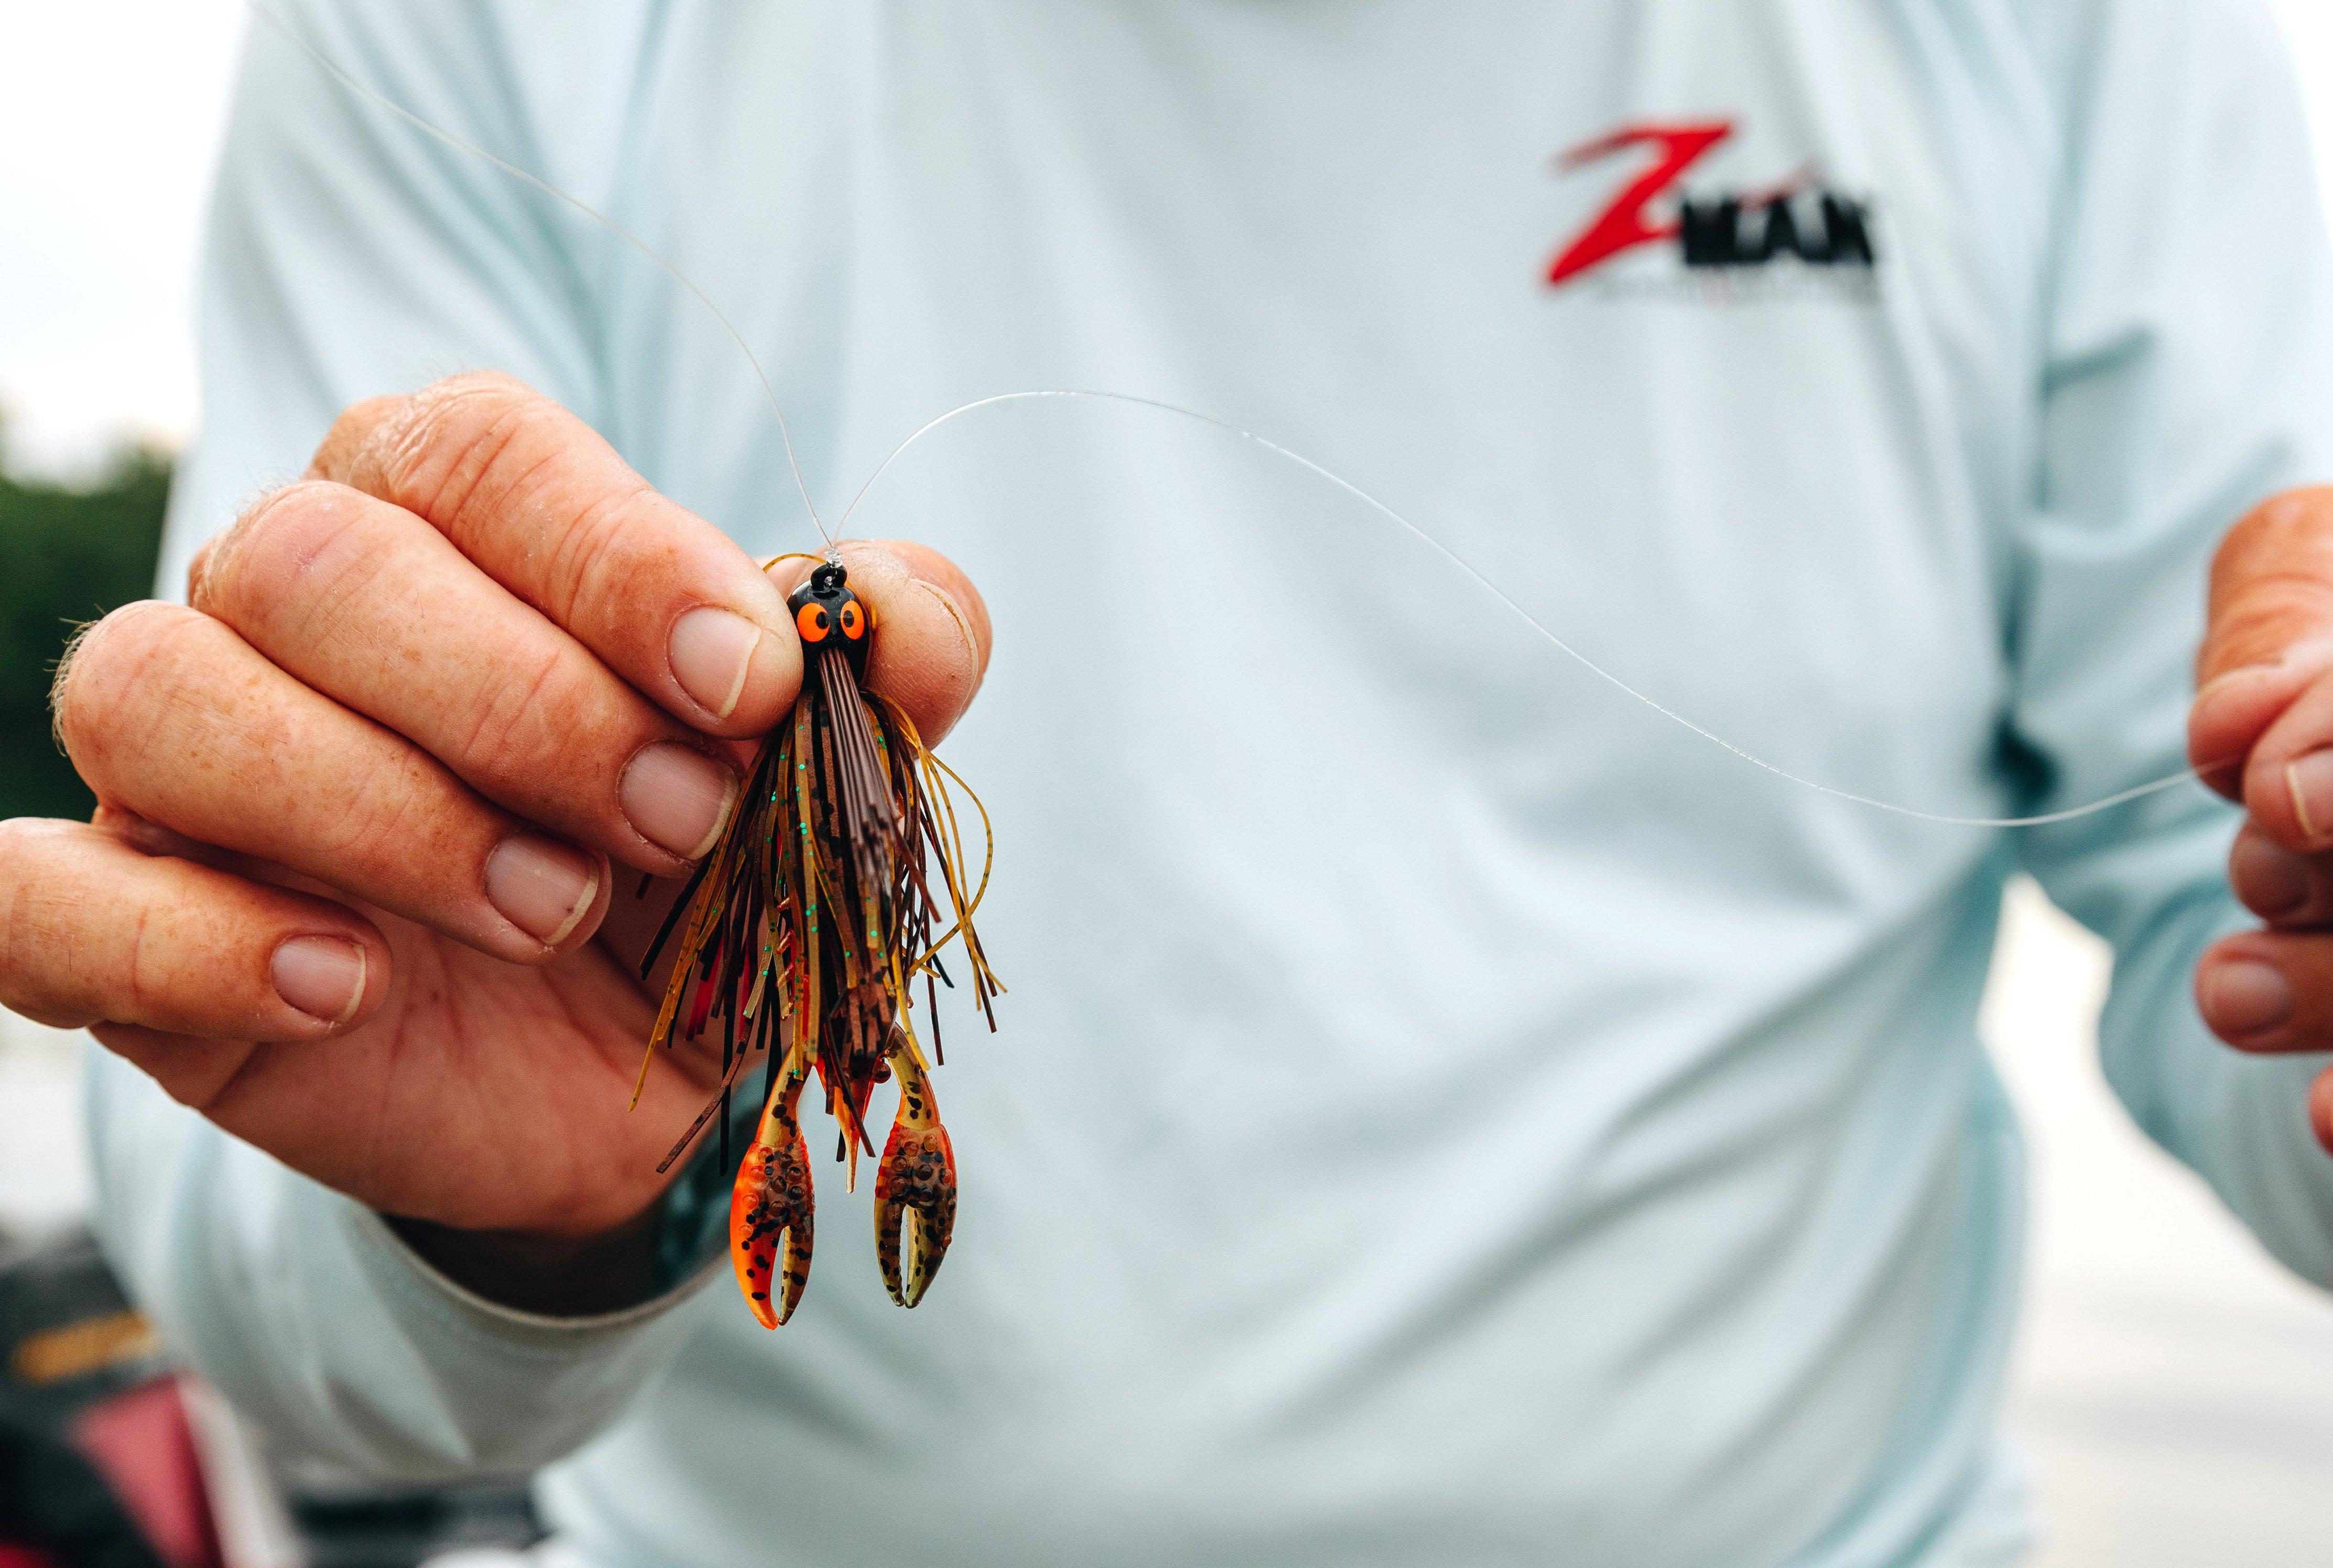 Jigs are the best bait for all species of bass this time of year. Downsize to a finesse model to get the most bites. Image by Millennium Promotions